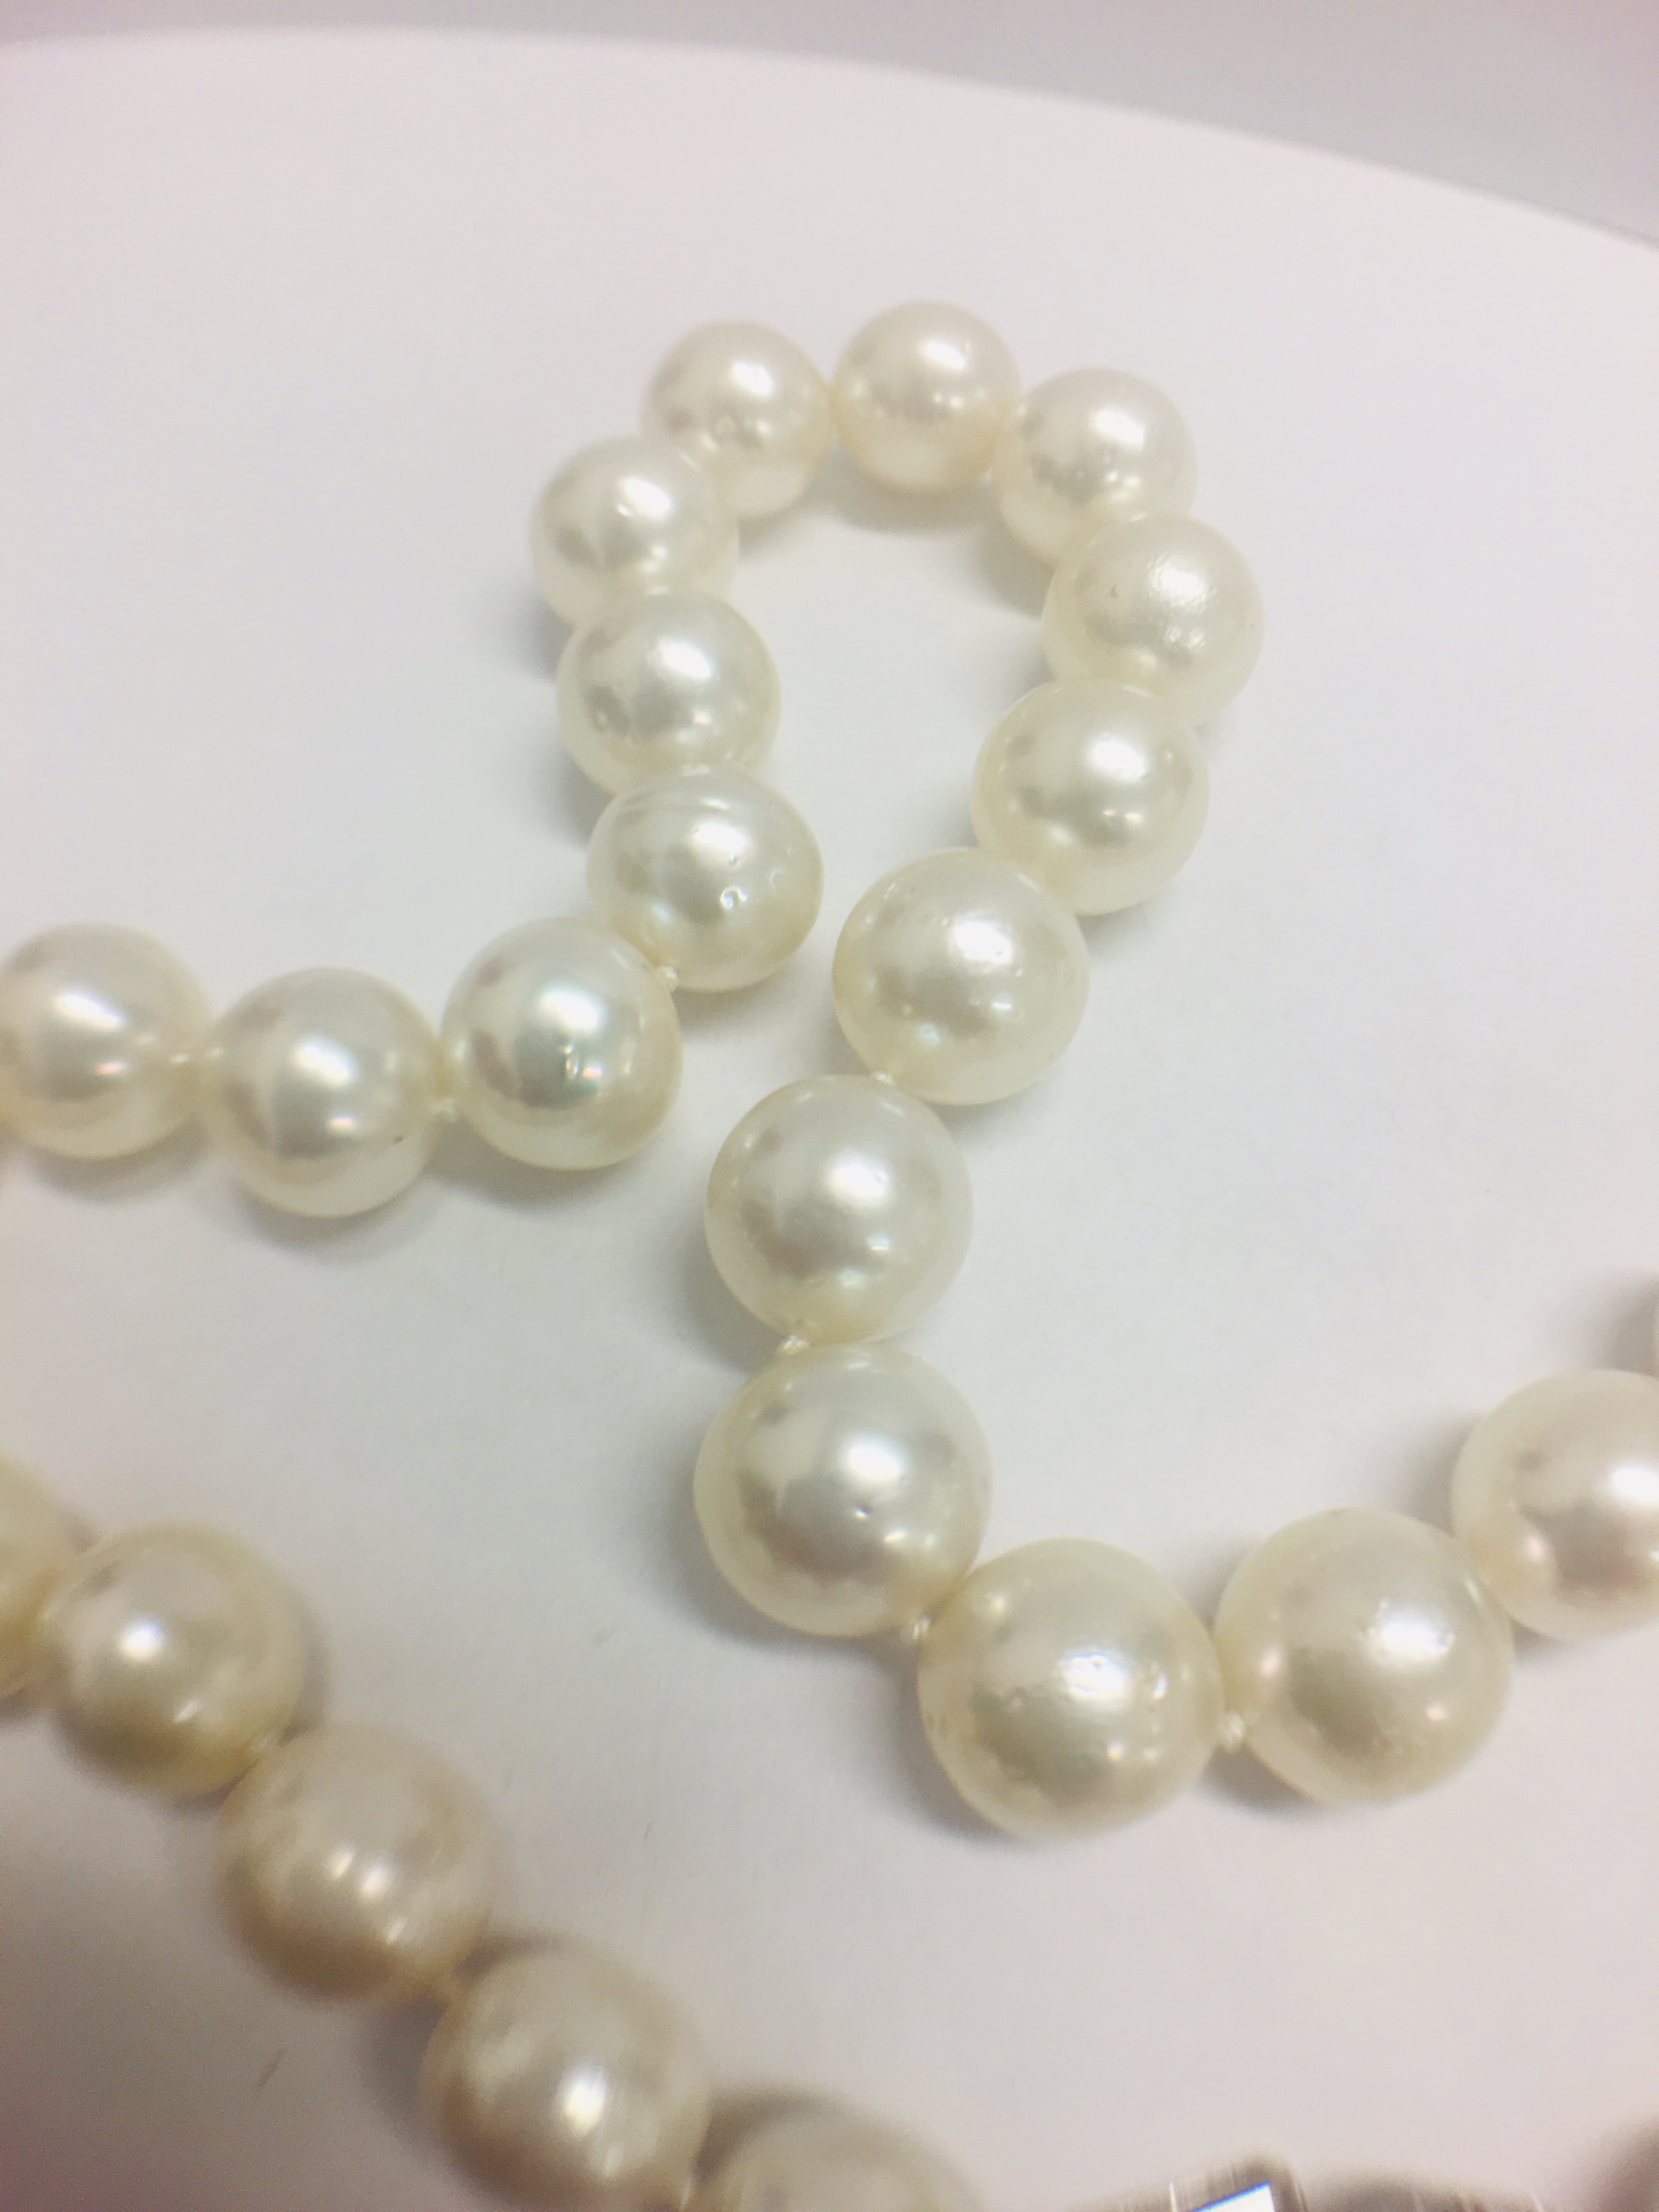 Strand 35 South Sea Pearls With 14Ct White Gold Filagree Style Ball Clasp. - Image 6 of 10